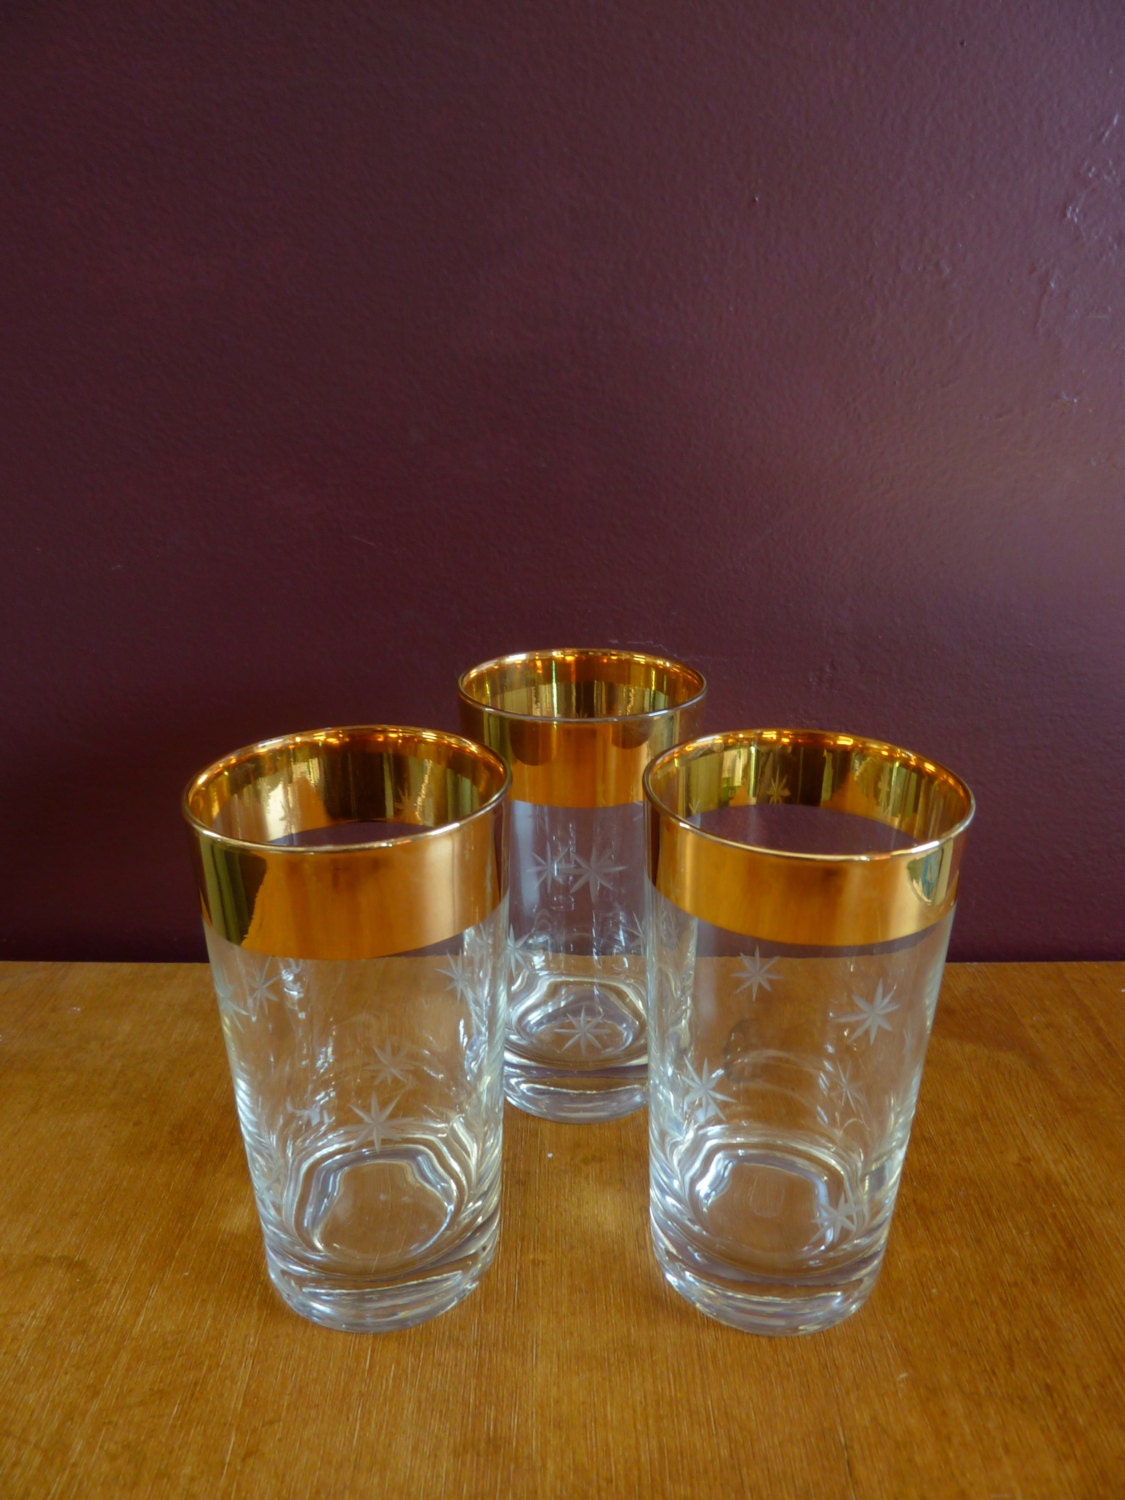 Gold Trio Vintage Drinking Glasses with Gold Rim and Etched